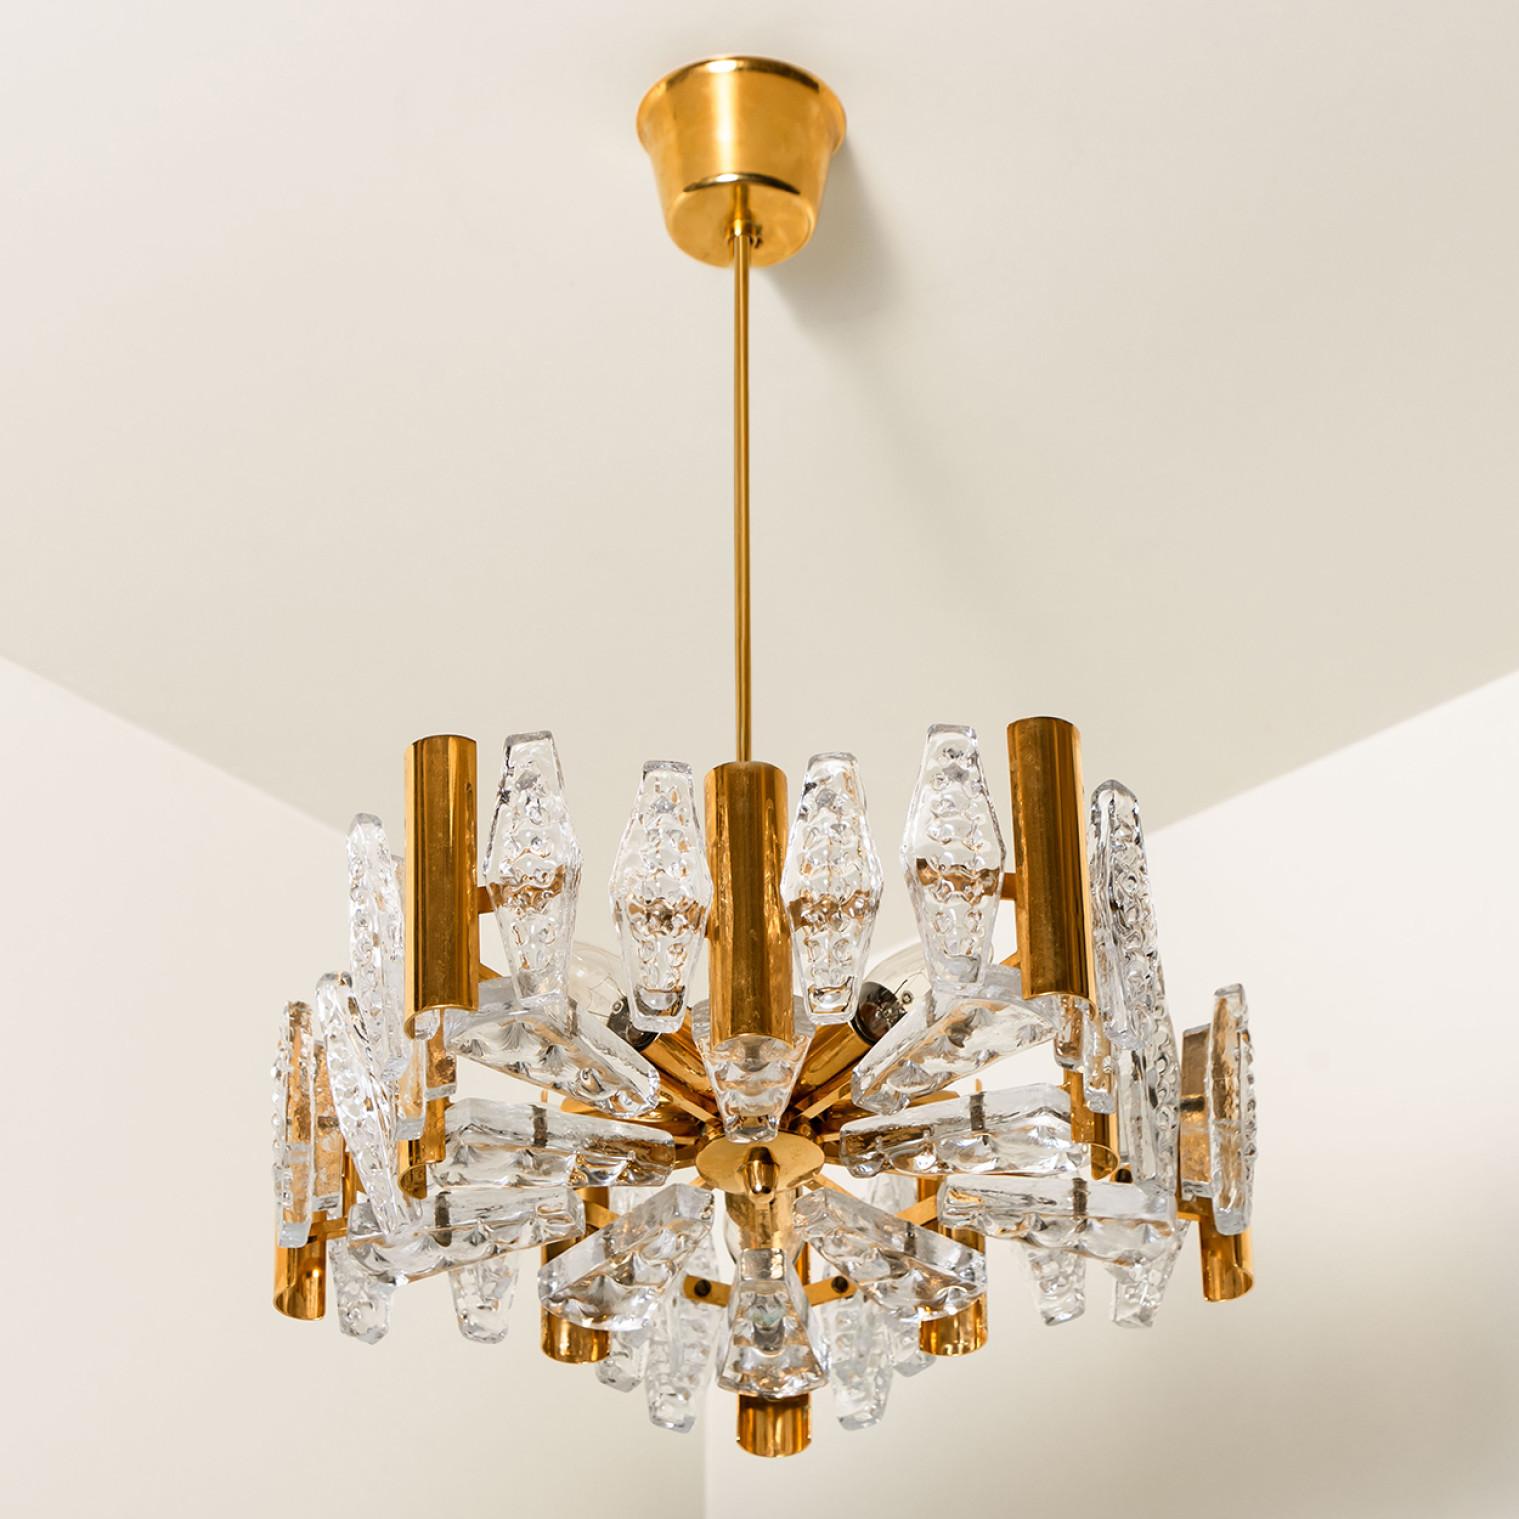 1 of the 2 Large Glass and Brass Chandelier by Orrefors, 1960s For Sale 4